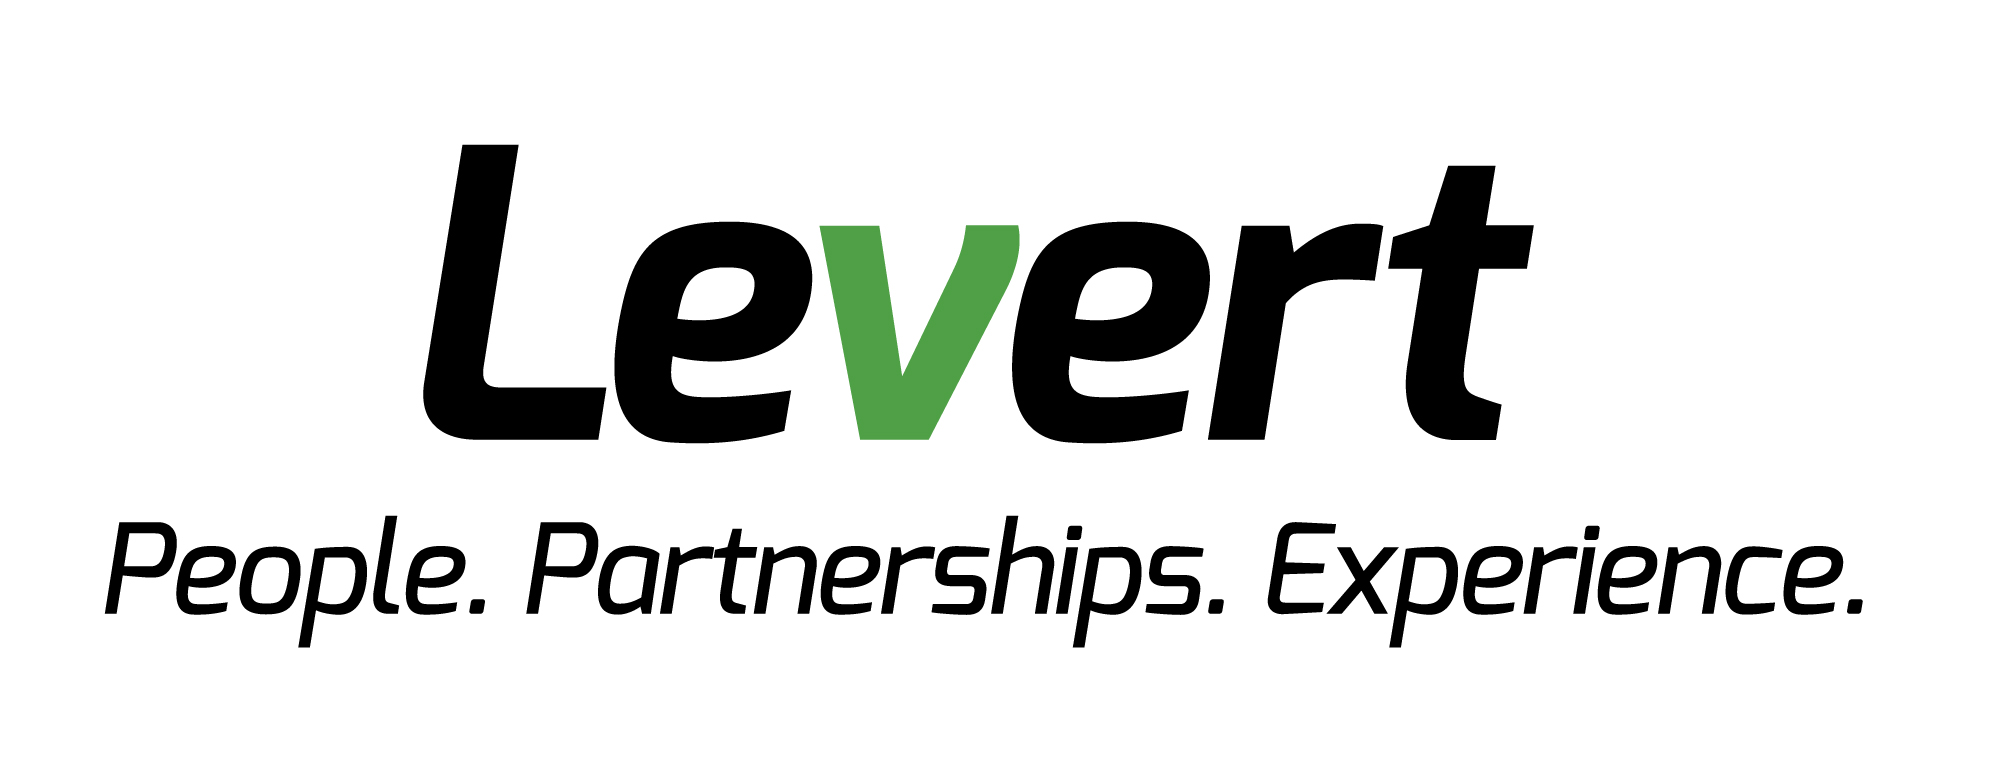 Levert - People. Partnerships. Experience.